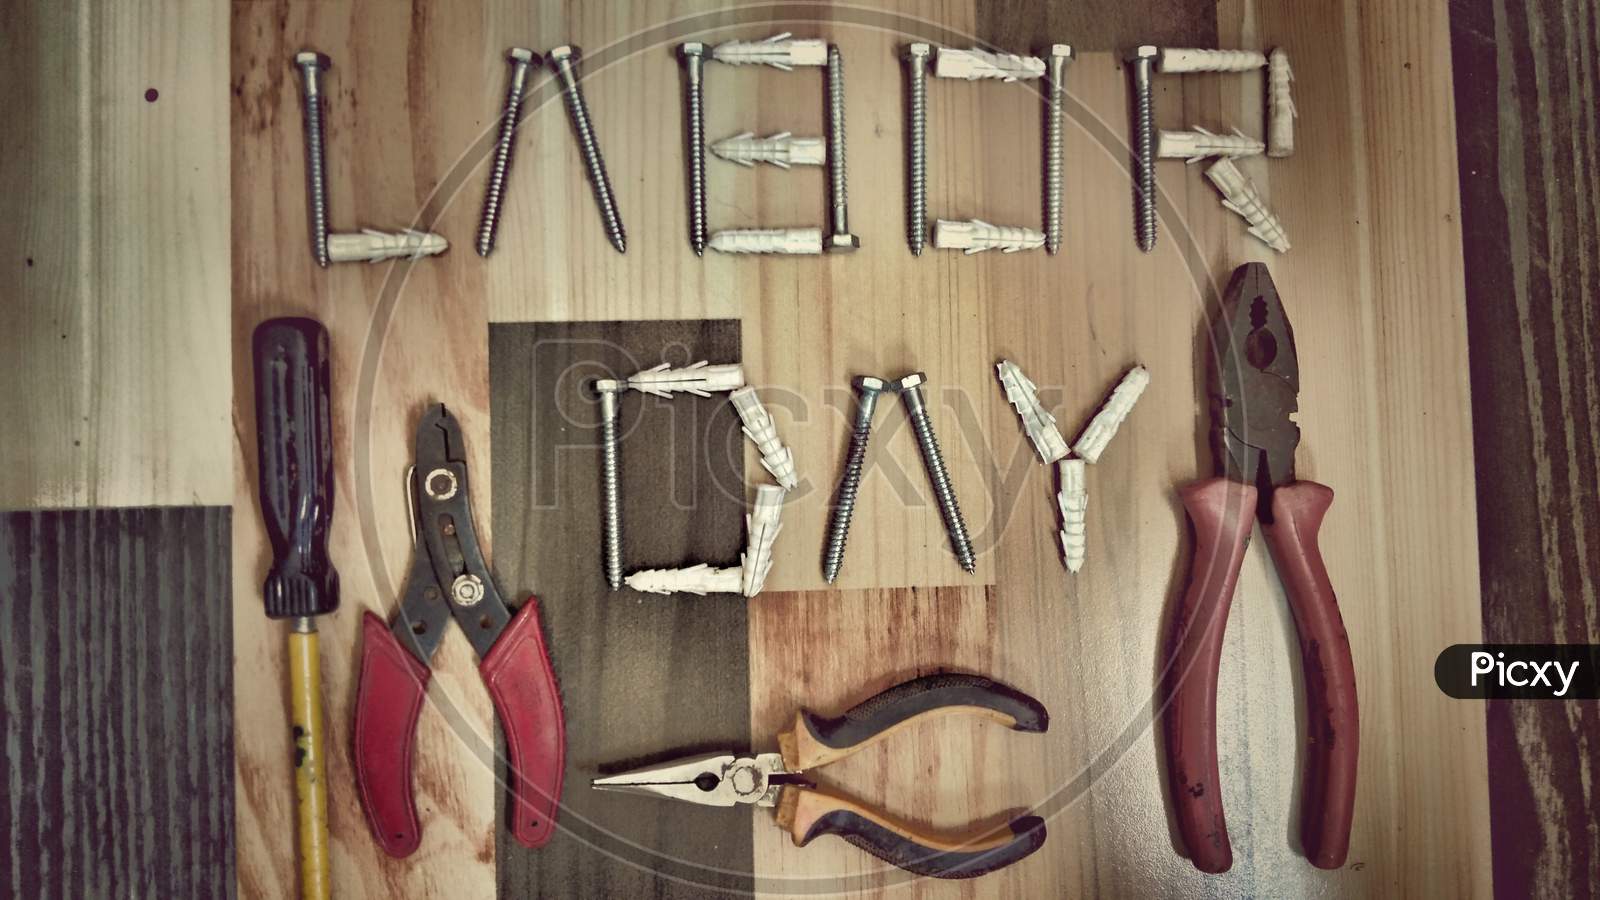 labor day with joinery tools on wooden background texture, workers day, May day